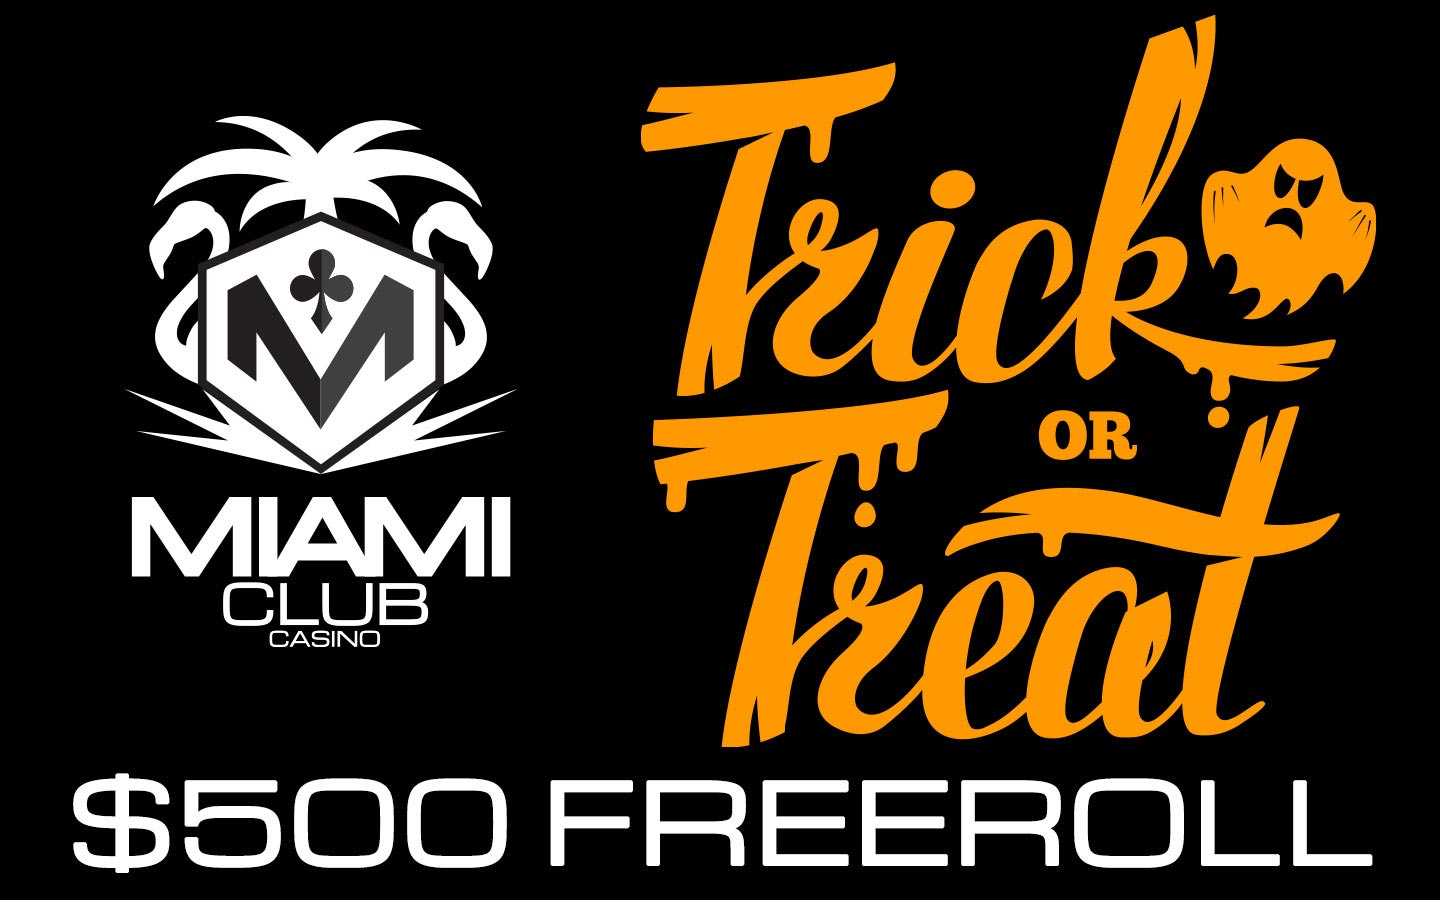 Giant Weekly Freeroll tournament at Miami Club Casino